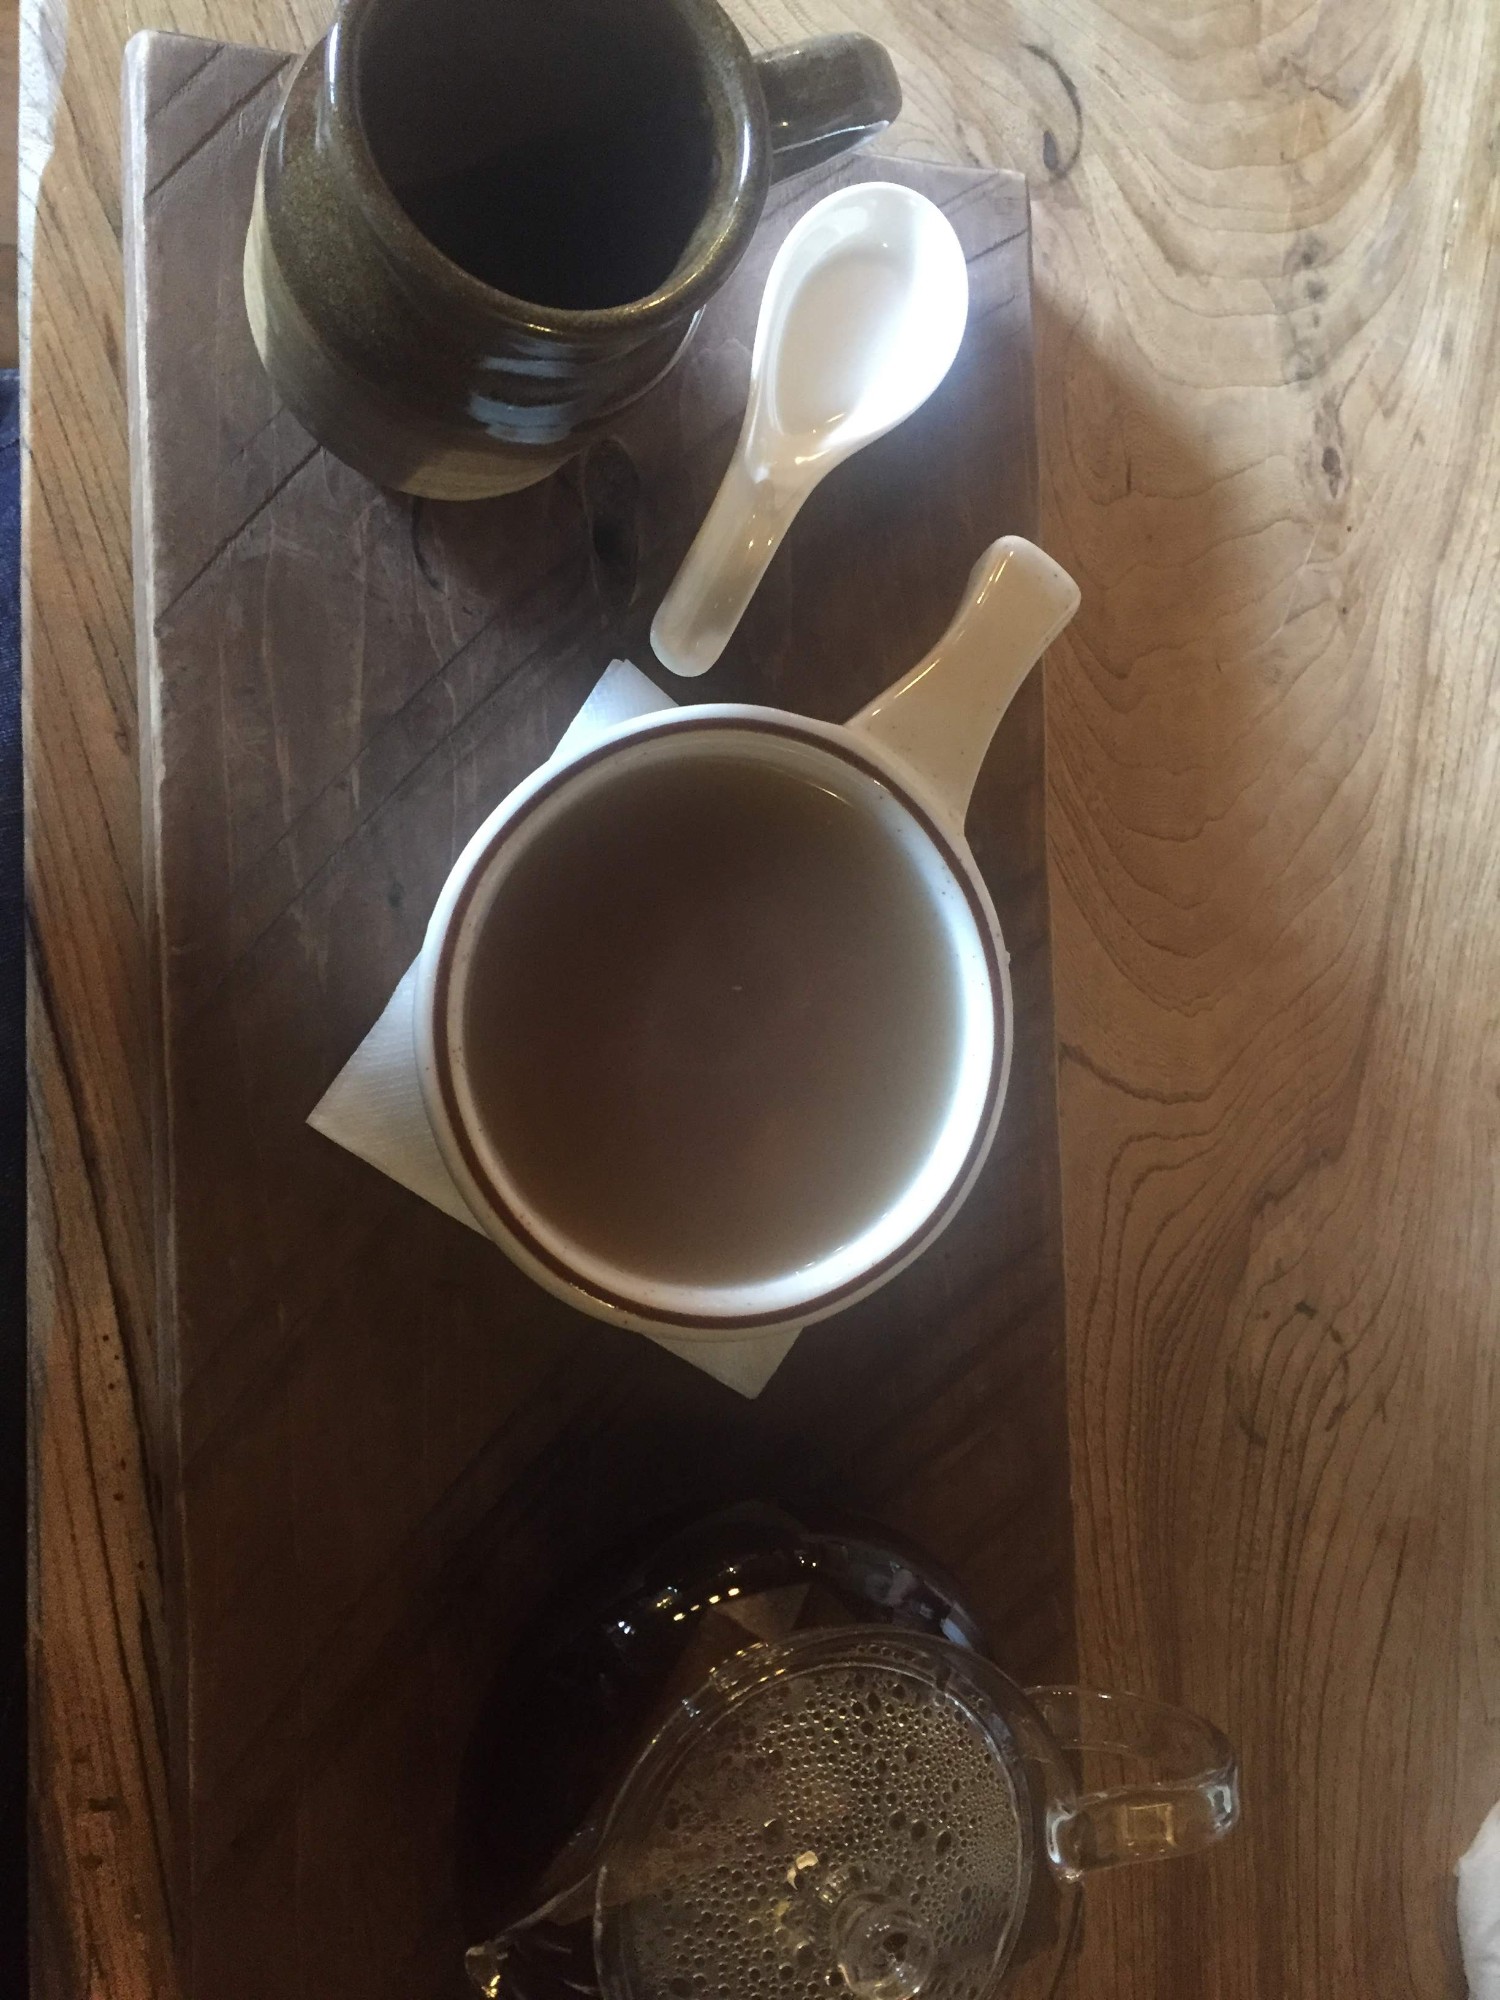 Tea and miso soup at High Garden, a favorite place to eat in East Nashville